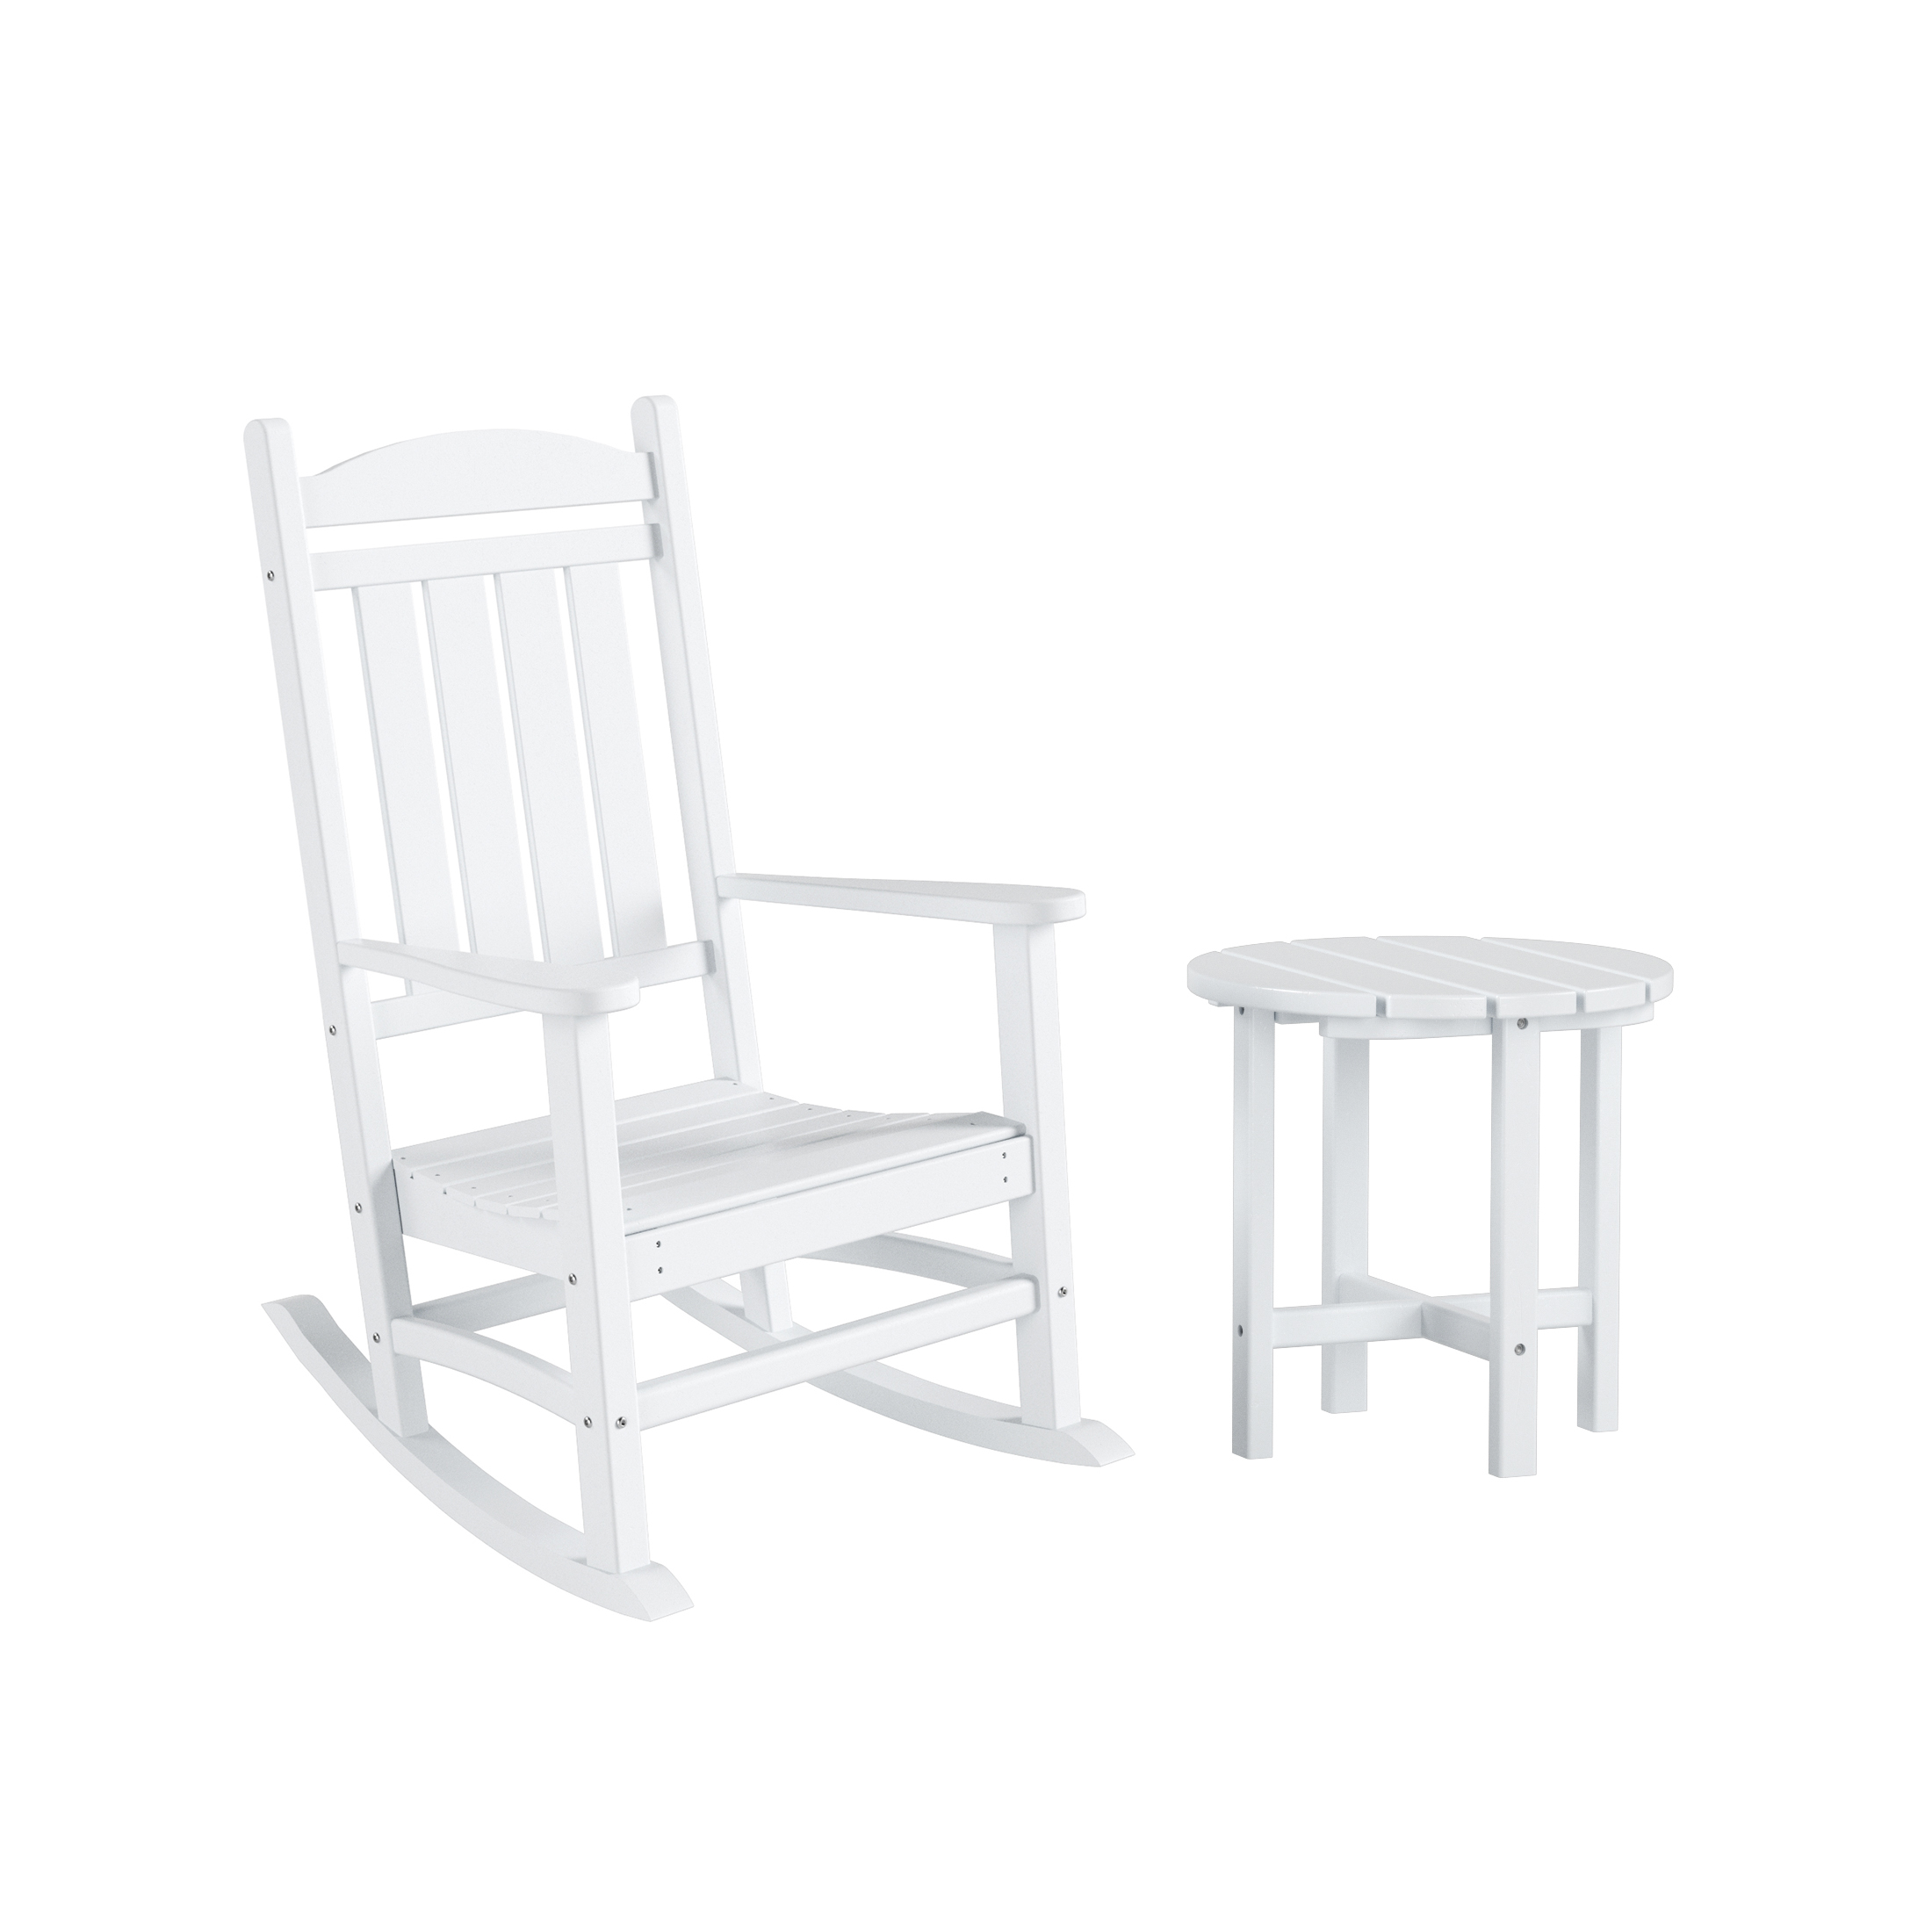 GARDEN 2-Piece Set Classic Plastic Porch Rocking Chair with Round Side Table Included, White - image 2 of 8